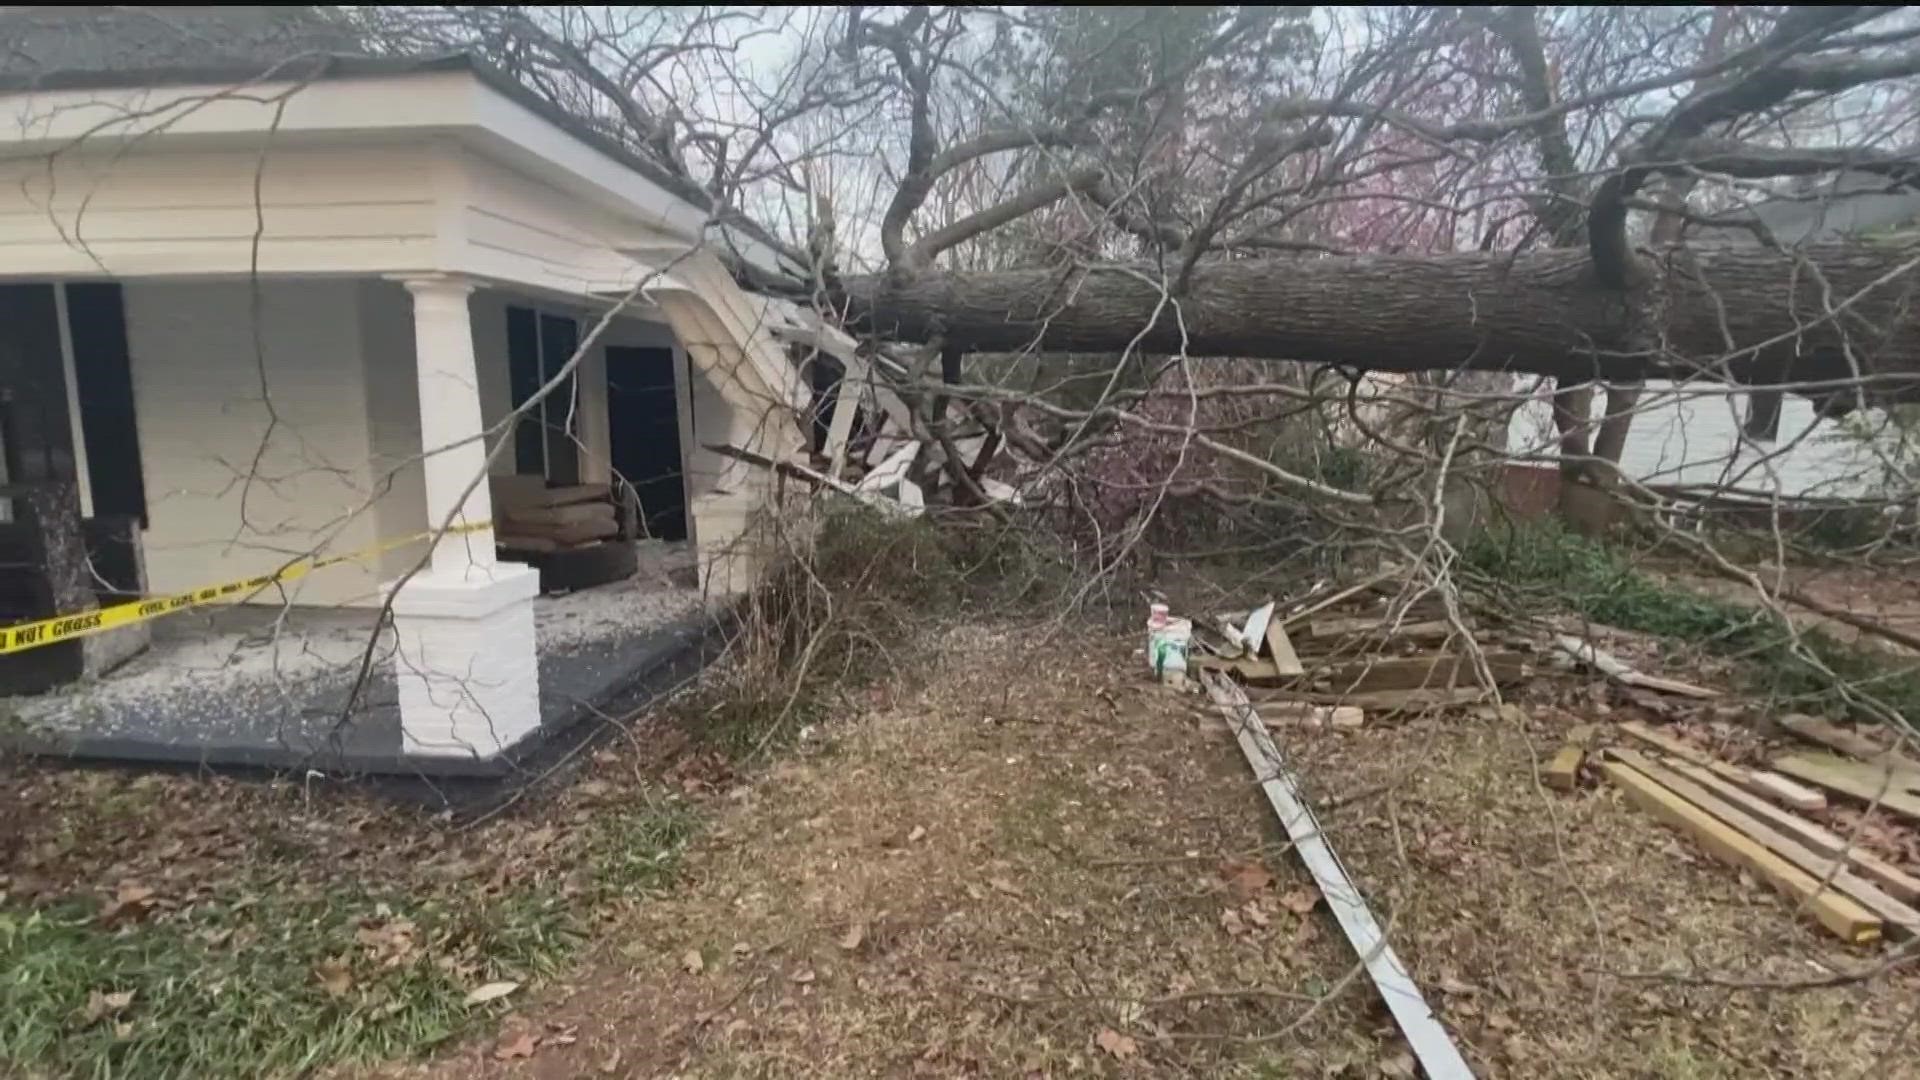 The National Weather Service said it was an EF-1 tornado that struck Troup County before dawn Friday morning.